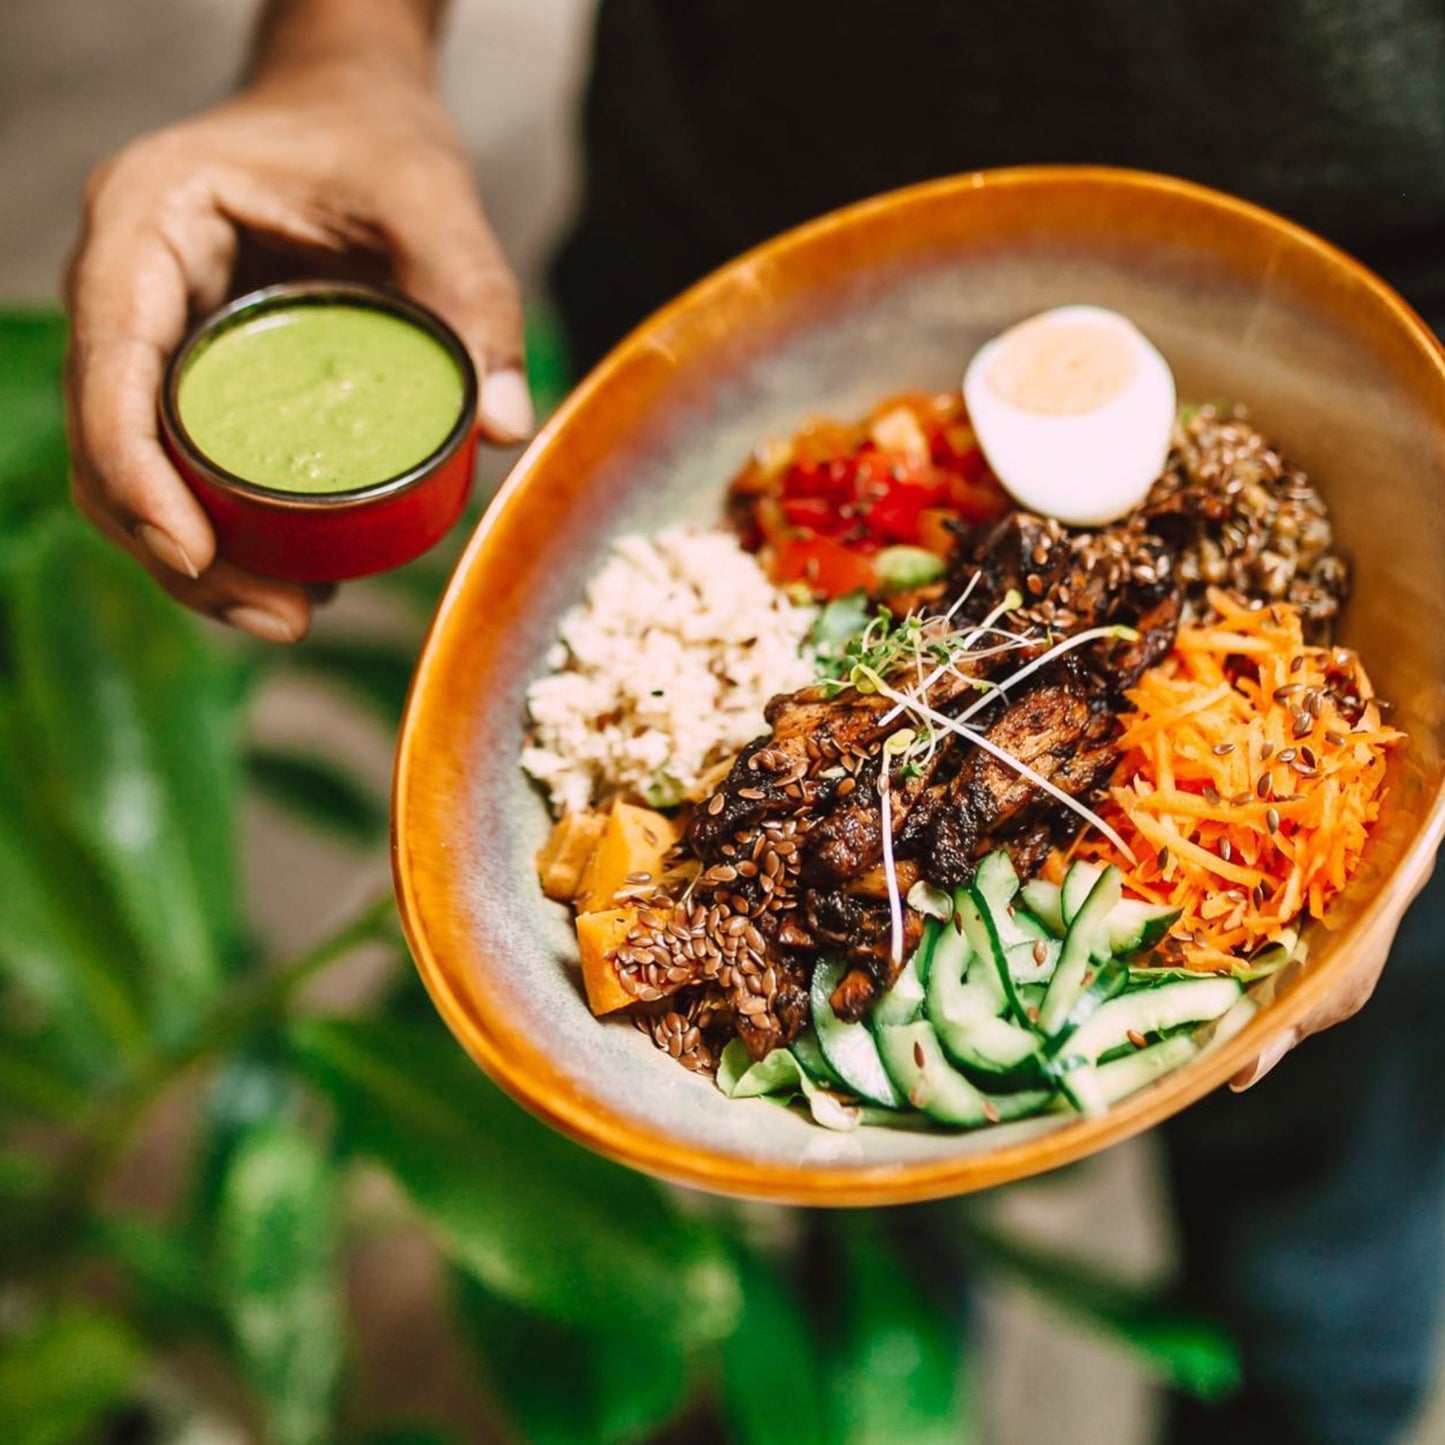 -50% for Superfood Harvest Bowl to choose from meat, vegan and vegetarian options: nutritious, filling and delicious meal in a botanical setting